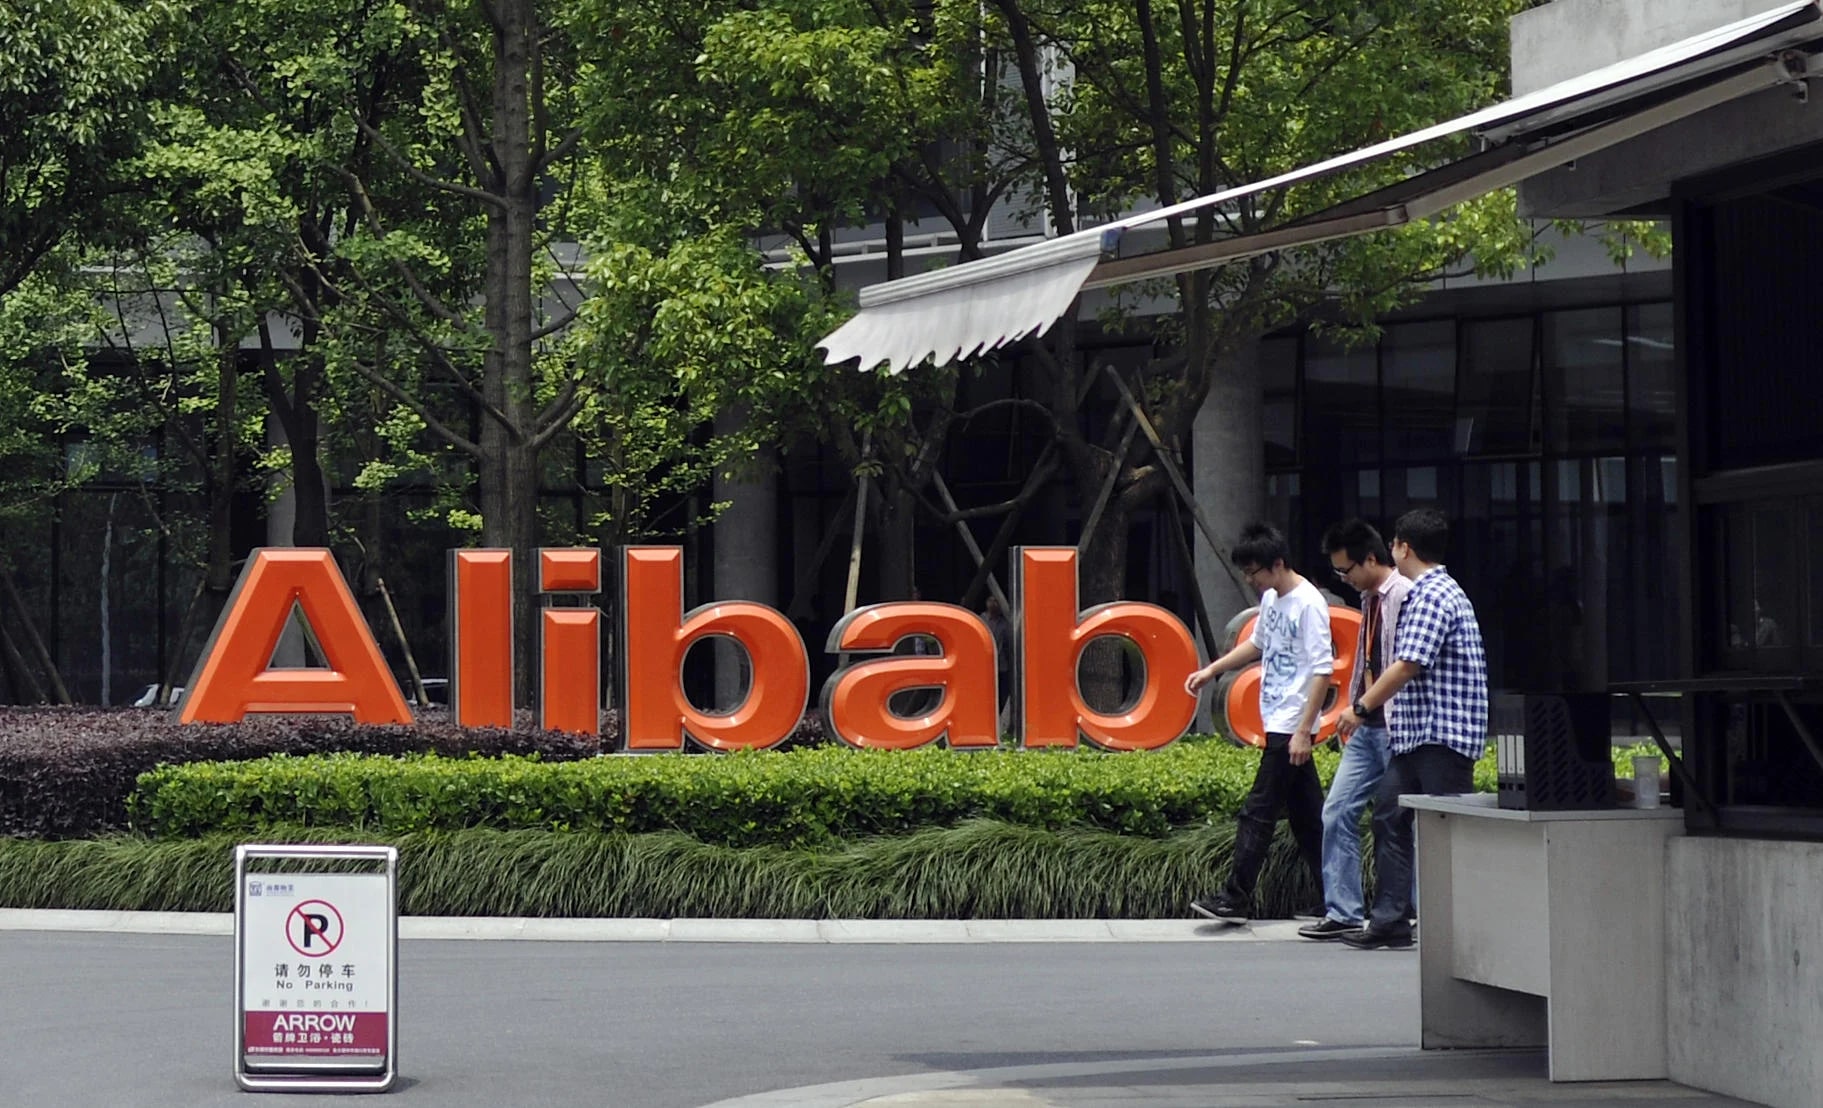 Alibaba Neteasefeng South China Is The Largest Recipient Of China’s Foreign